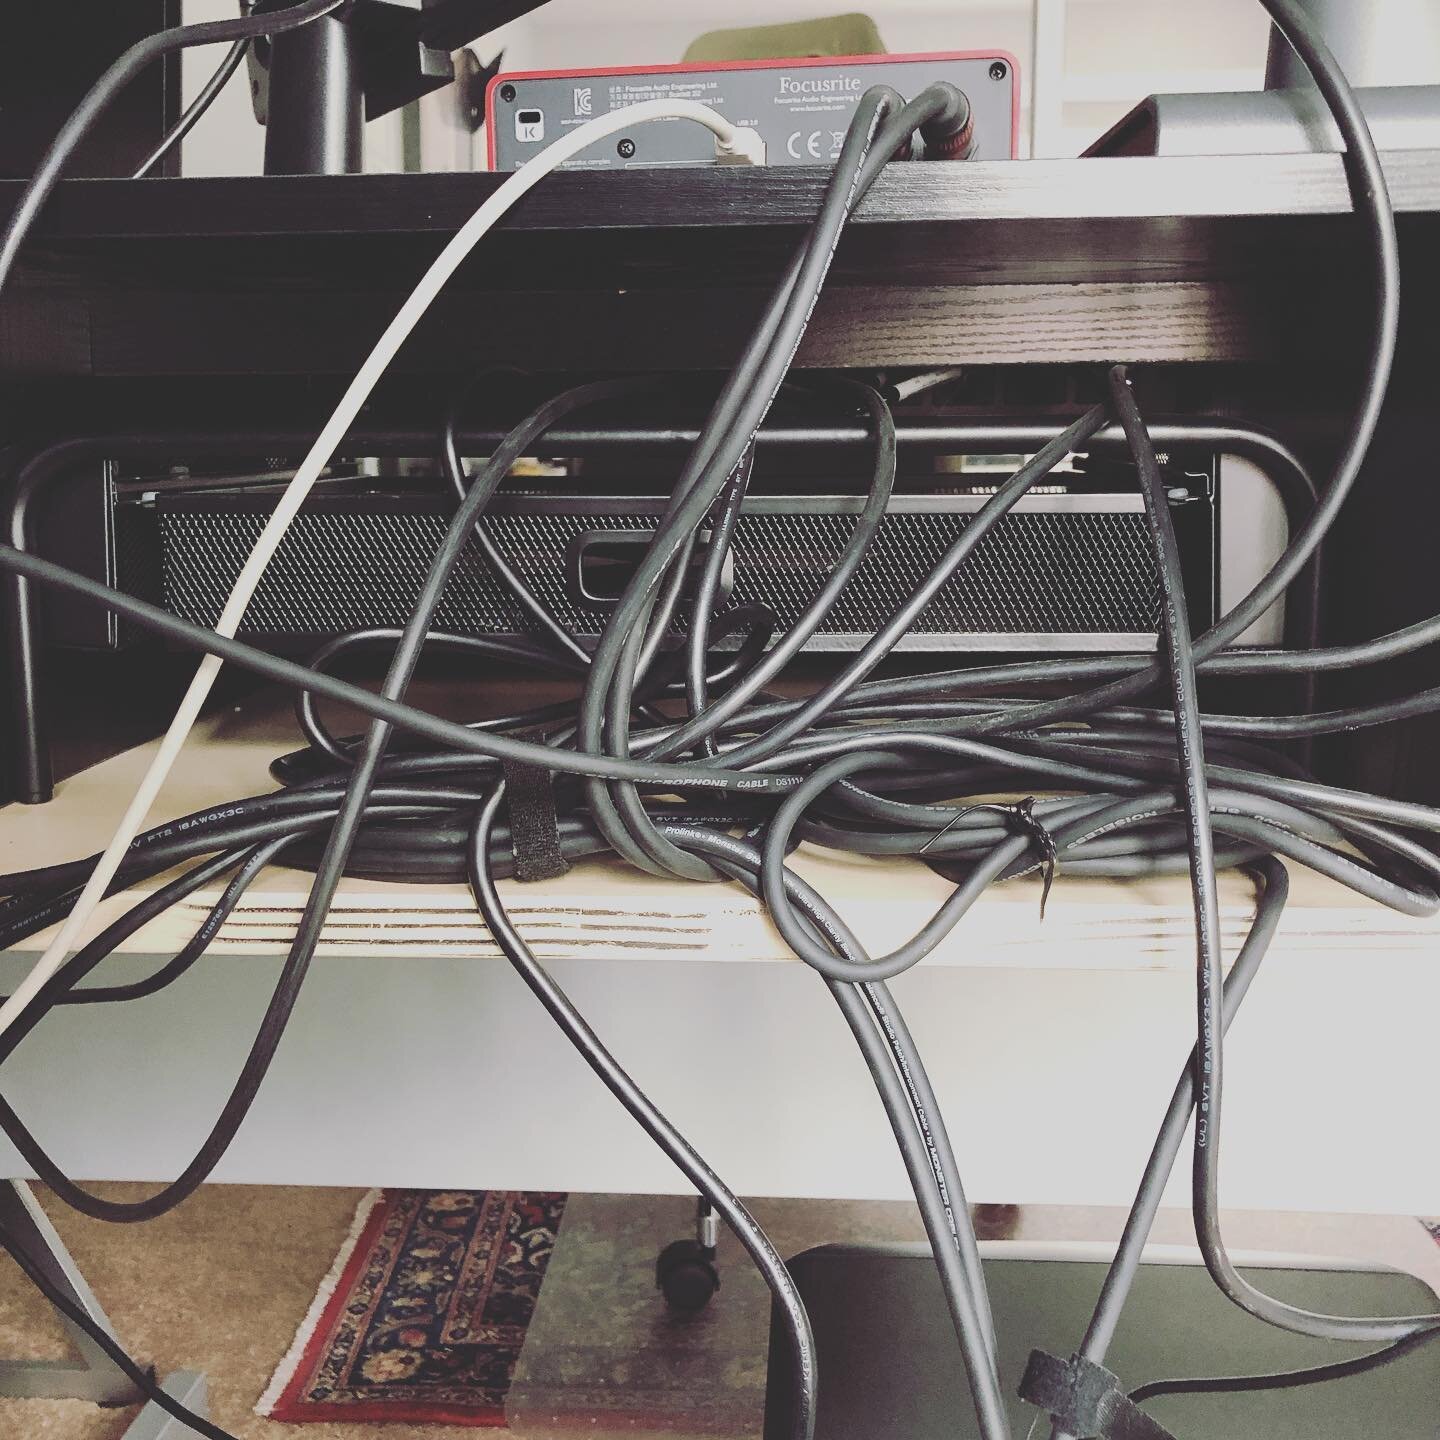 Cord management aka &ldquo;why I save all the black twisty ties that come with gear and electronics&rdquo; &bull;
&bull;
&bull;
&bull;
#newgear #composers #filmmusic #musicproducer #filmcomposer #music #subwoofer #bass #krk #maudio